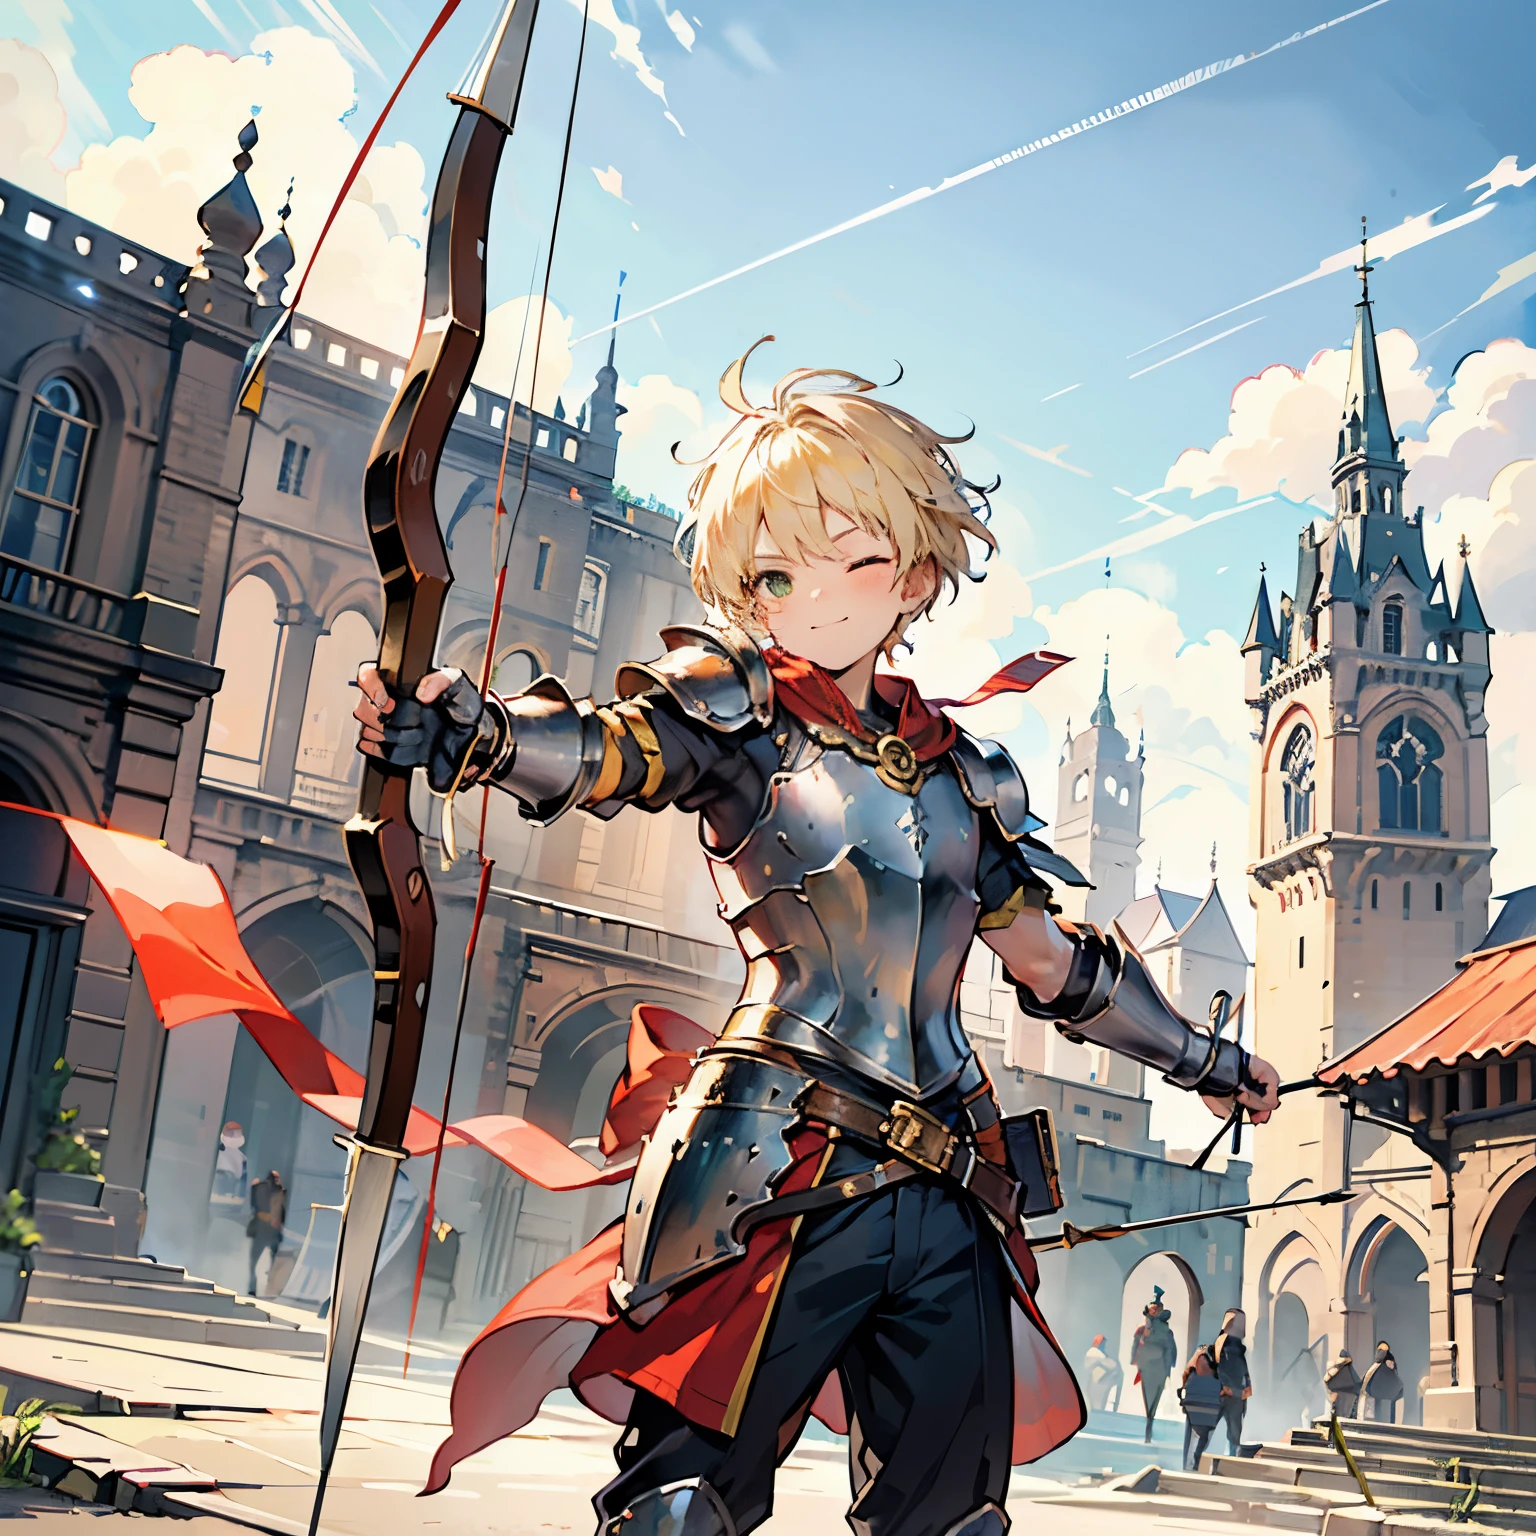 Front view, dynamic angle, 1 boy, young boy, archer, kid archer, blonde hair, green eyes, cute, confident, cocky, smile, 1 eye closed, yellow armor pieces, 1 shoulder plate, shoulder plate and gauntlet in his left arm, armor headpiece, minimal chest plate, no lower body armor, holding a wooden bow in his left hand, simple wooden bow, ready to shoot his arrow, bow and arrow, shooting pose, archer pose, action pose, dynamic pose, medieval setting, medieval city background, castle background, medieval castle background